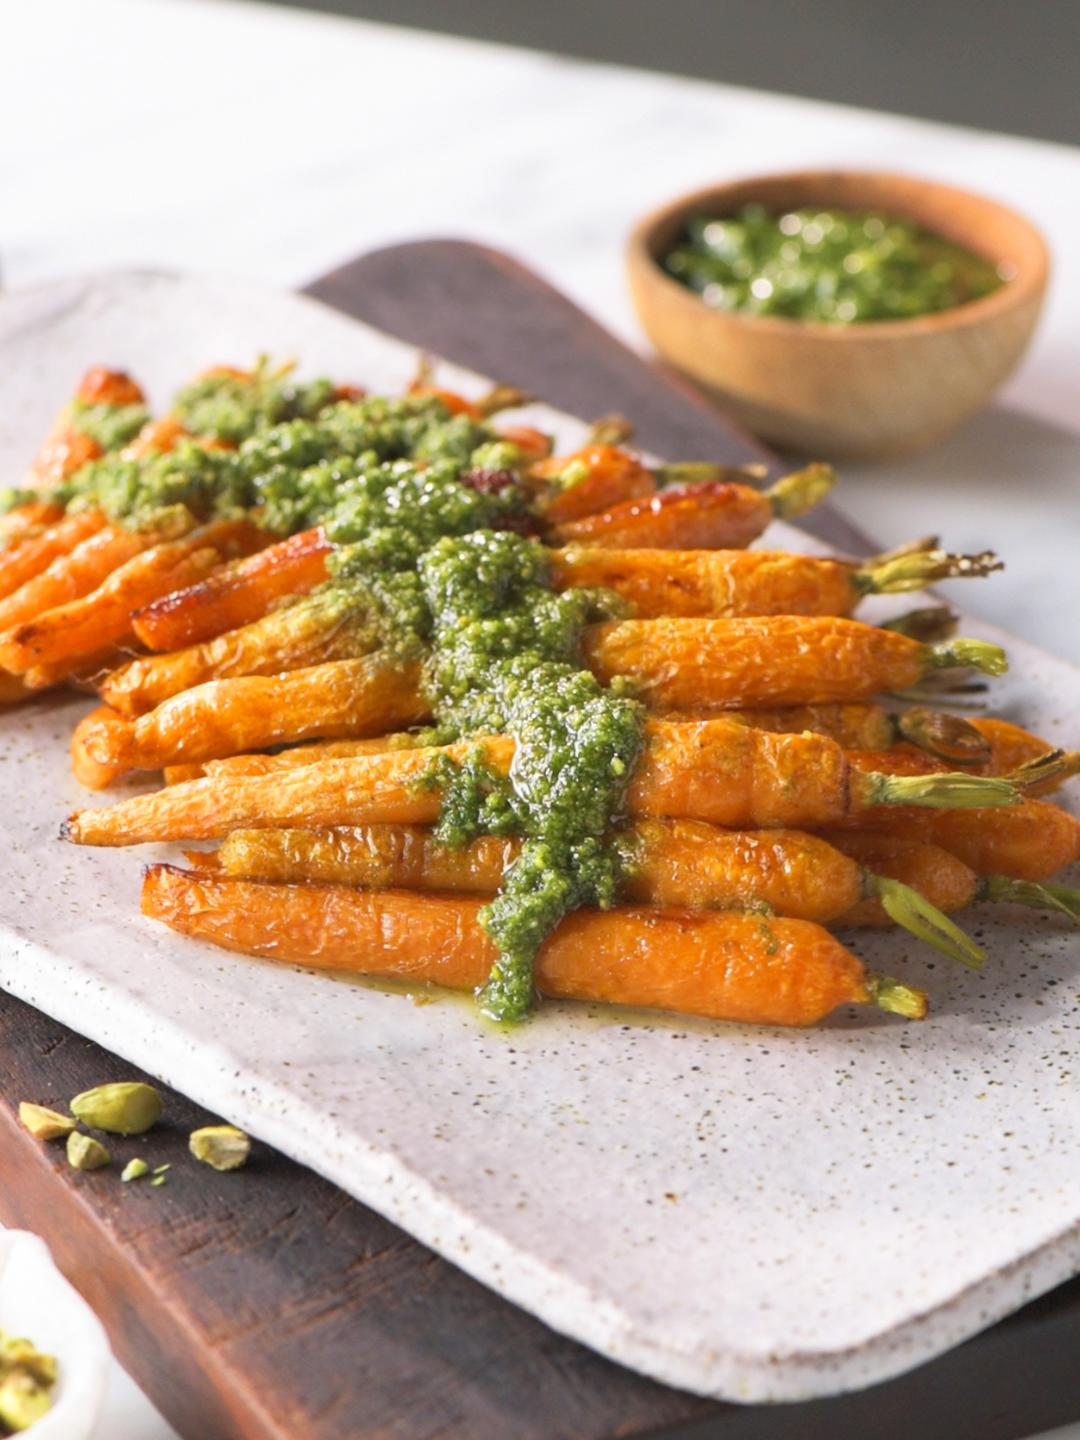 Heirloom Carrots with Carrot Top Pesto